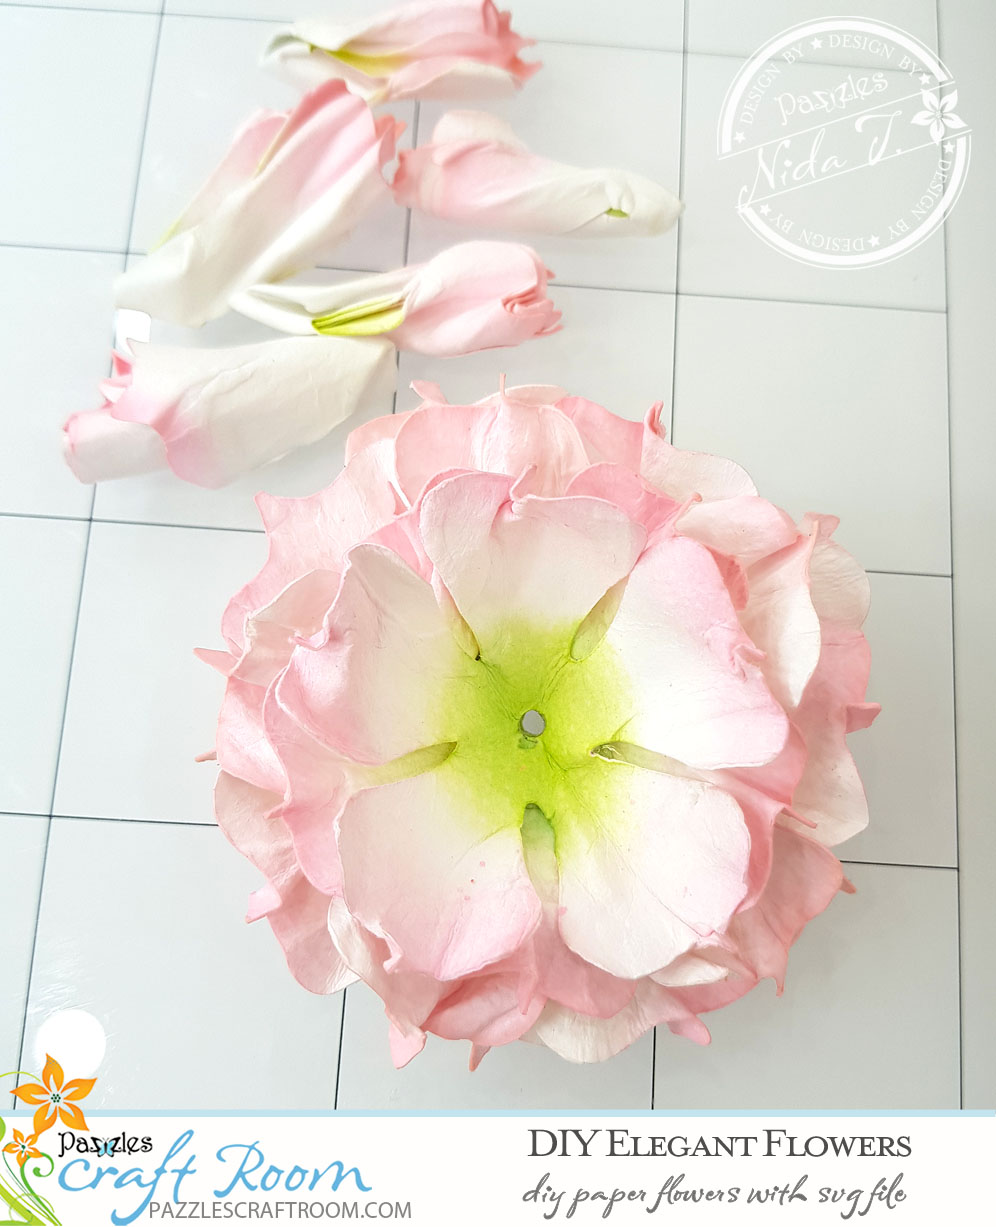 Pazzles Elegant DIY Paper Flowers with instant SVG download. Compatible with all major electronic cutters including Pazzles Inspiration, Cricut, and Silhouette Cameo. Design by Nida Tanweer.